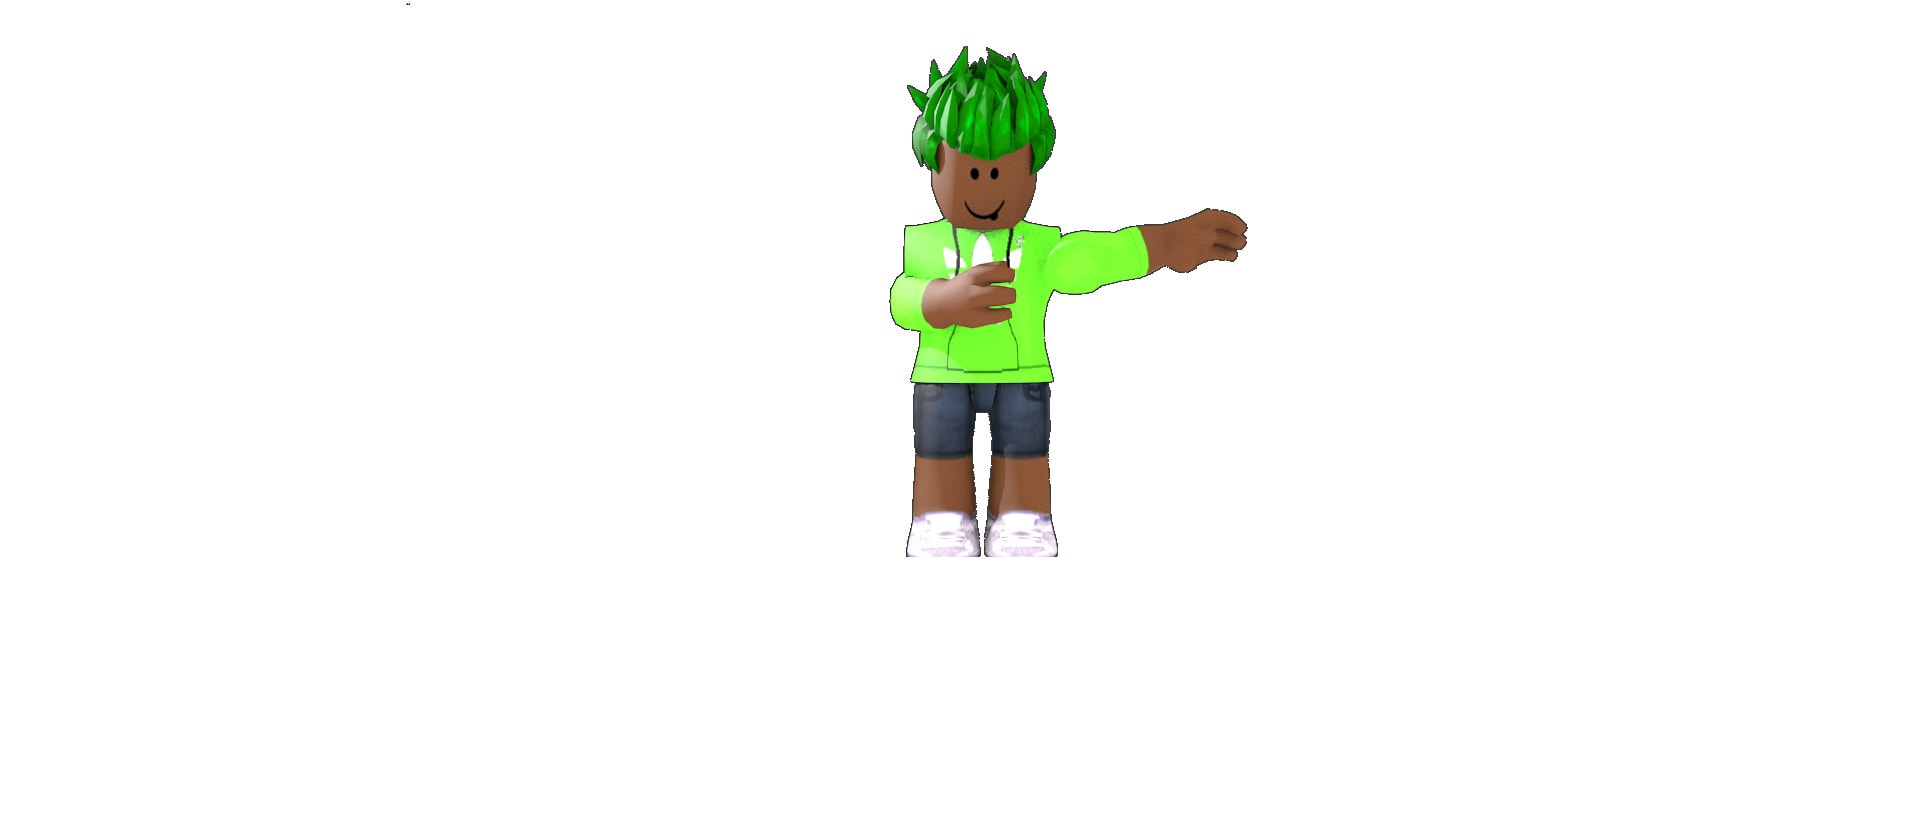 Render Your Roblox Character By Budder - roblox character renders plus ads by zilana